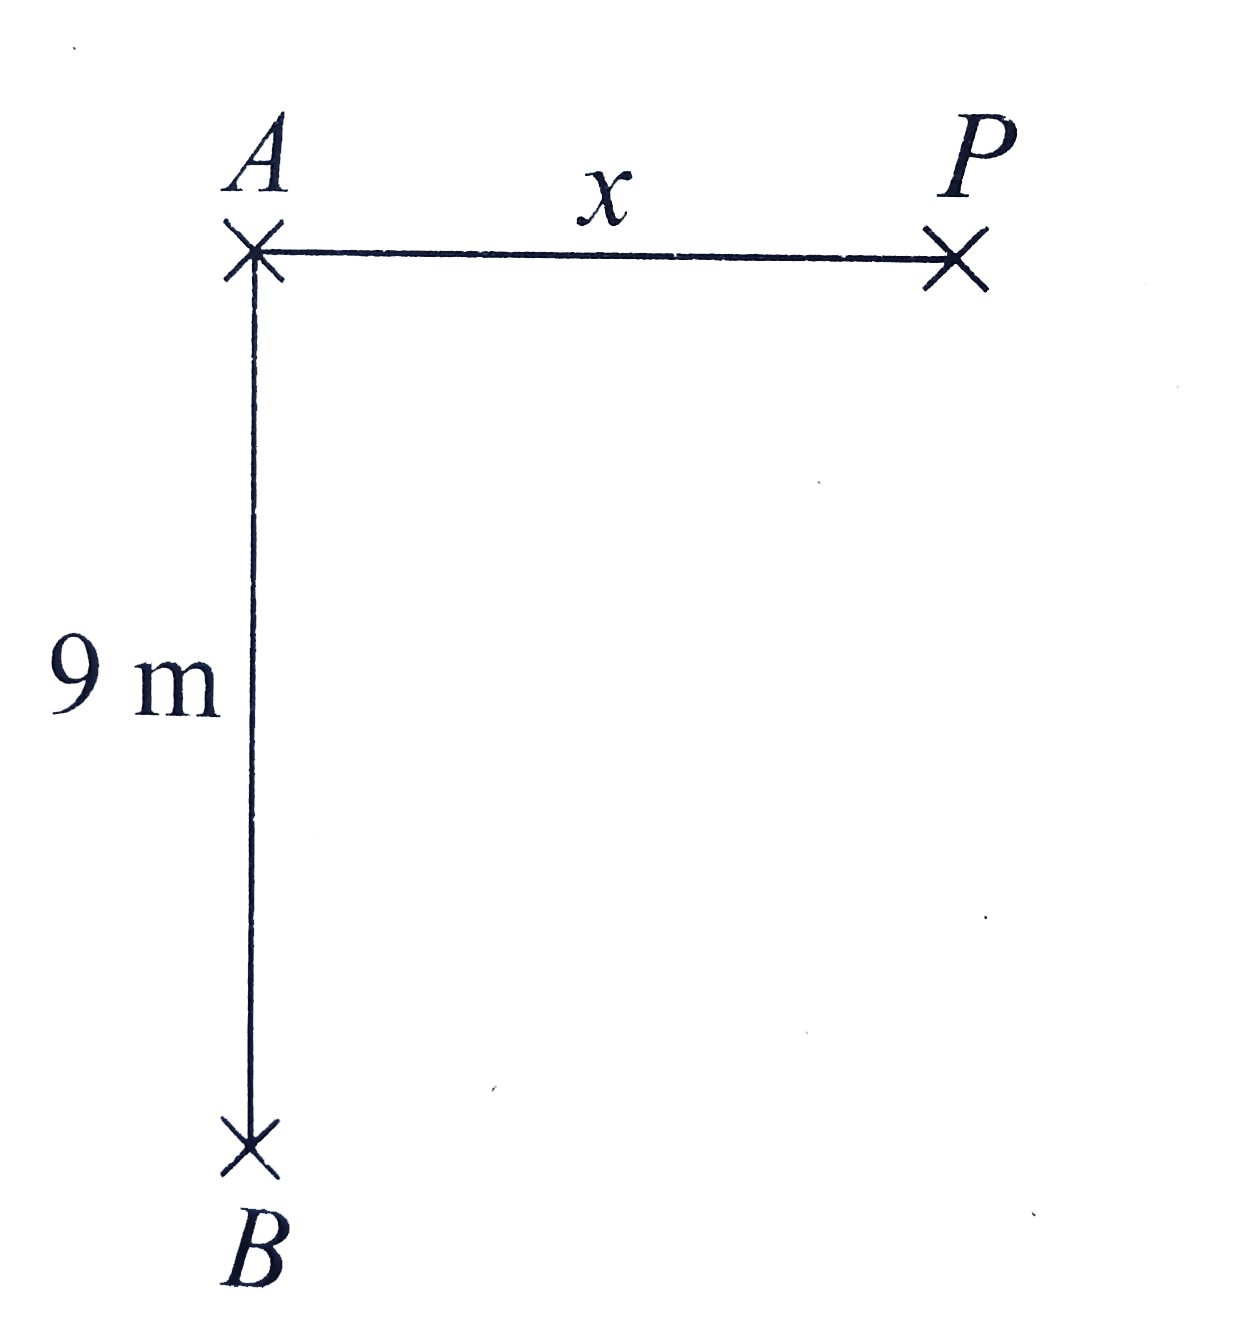 A radio transmitting station operating at a frequency of 120 MHz has two identical antennas that radiate in phase. Antenna B is 9 m to the right of antenna A. consider point P at a horizontal distance x to the right of antenna A as shown in figure. The value of x and order for which the constructive interference will occur at point P are